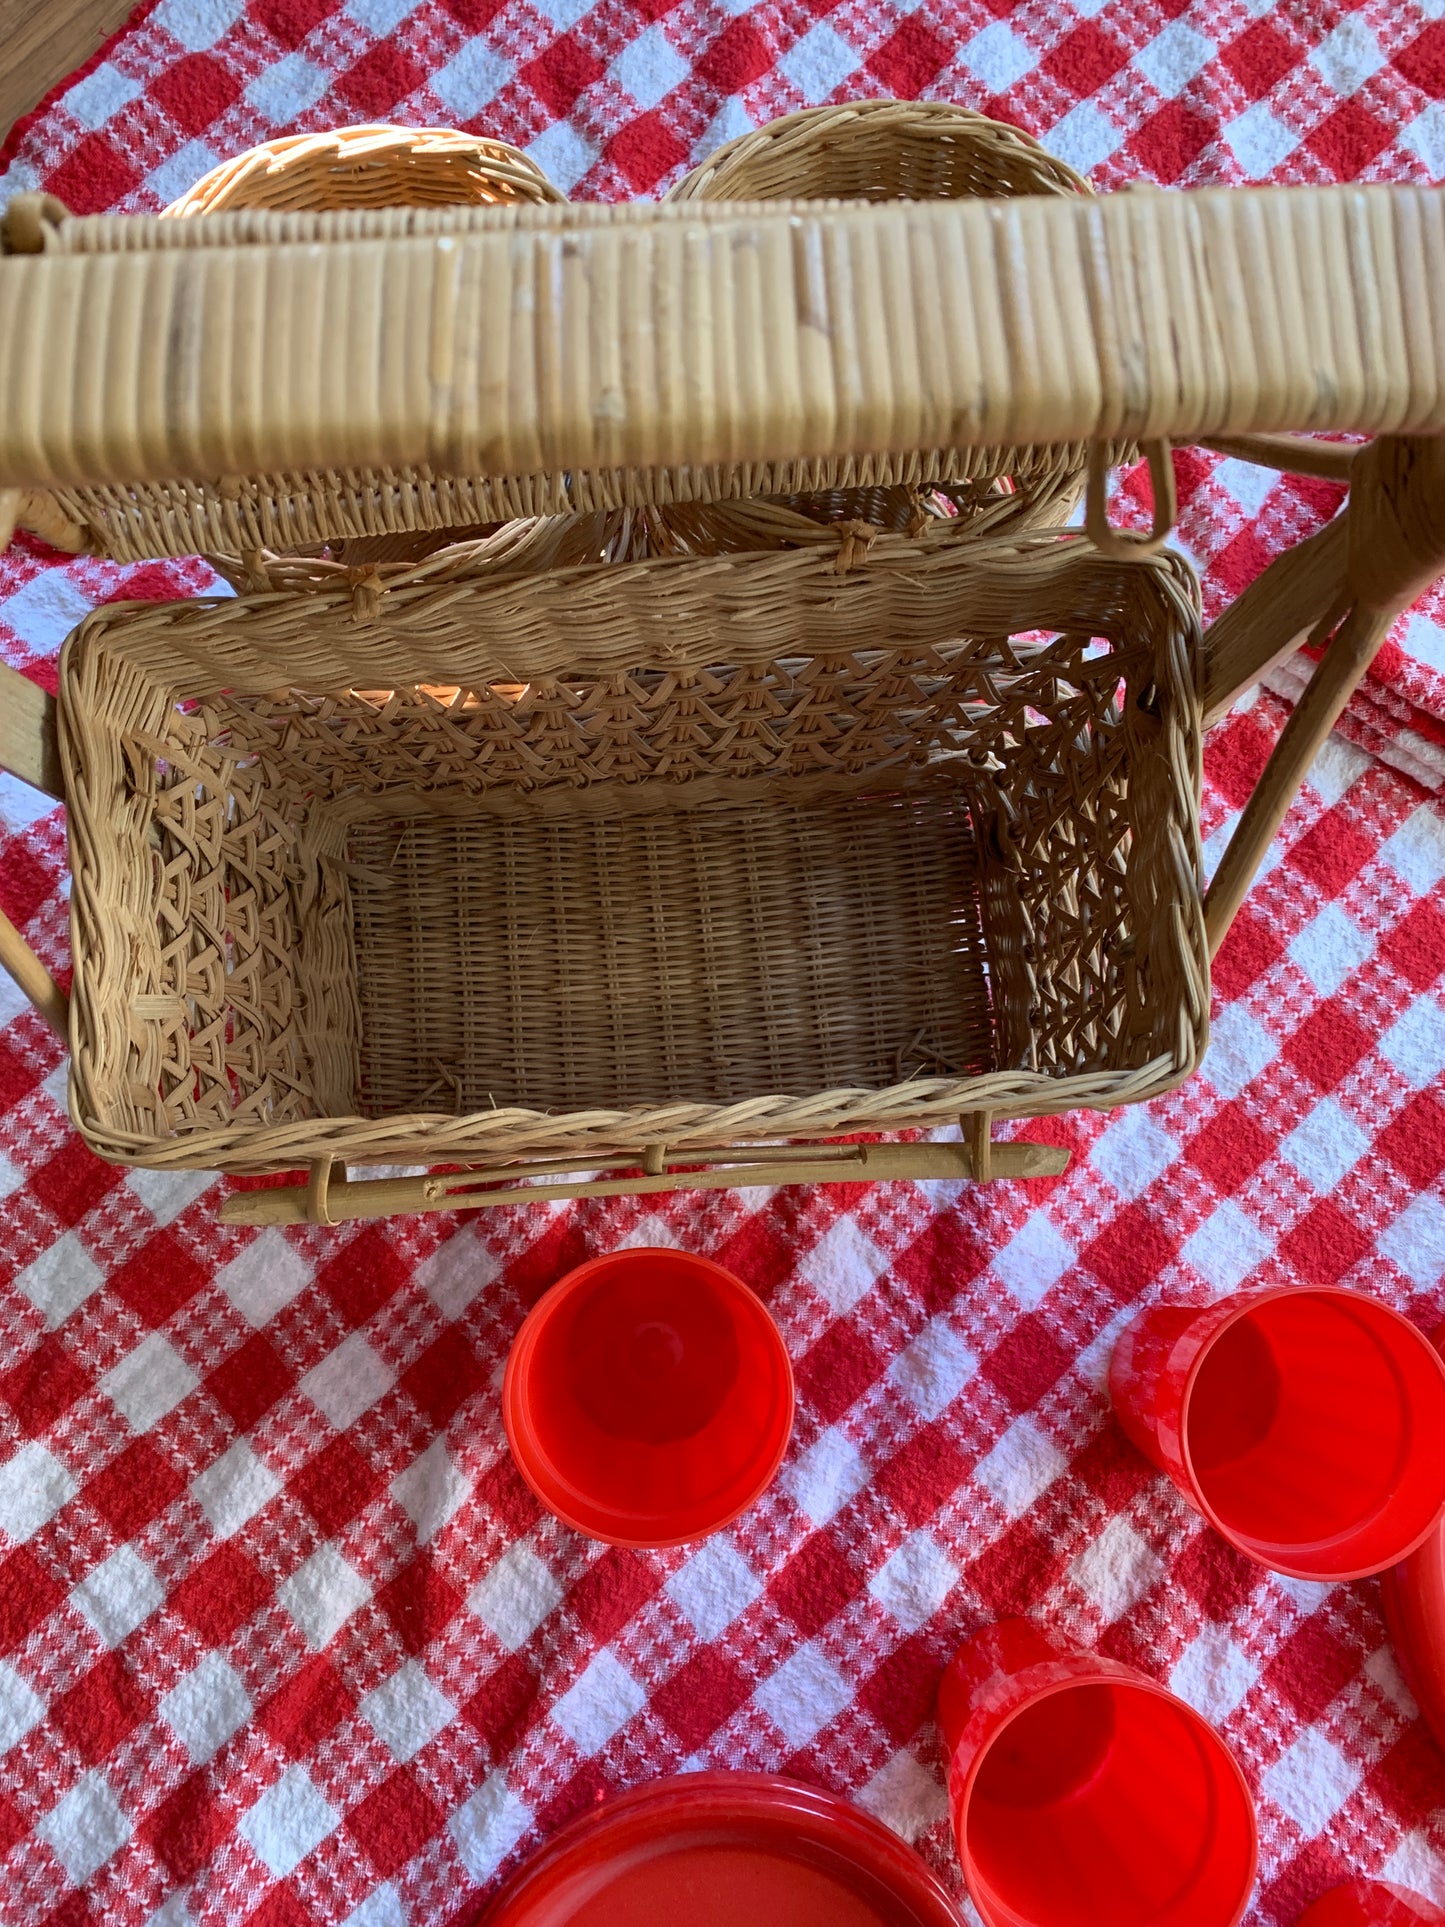 Vintage Wicker Picnic Basket Set With Blanket Cups Plates Utensils Red White Check